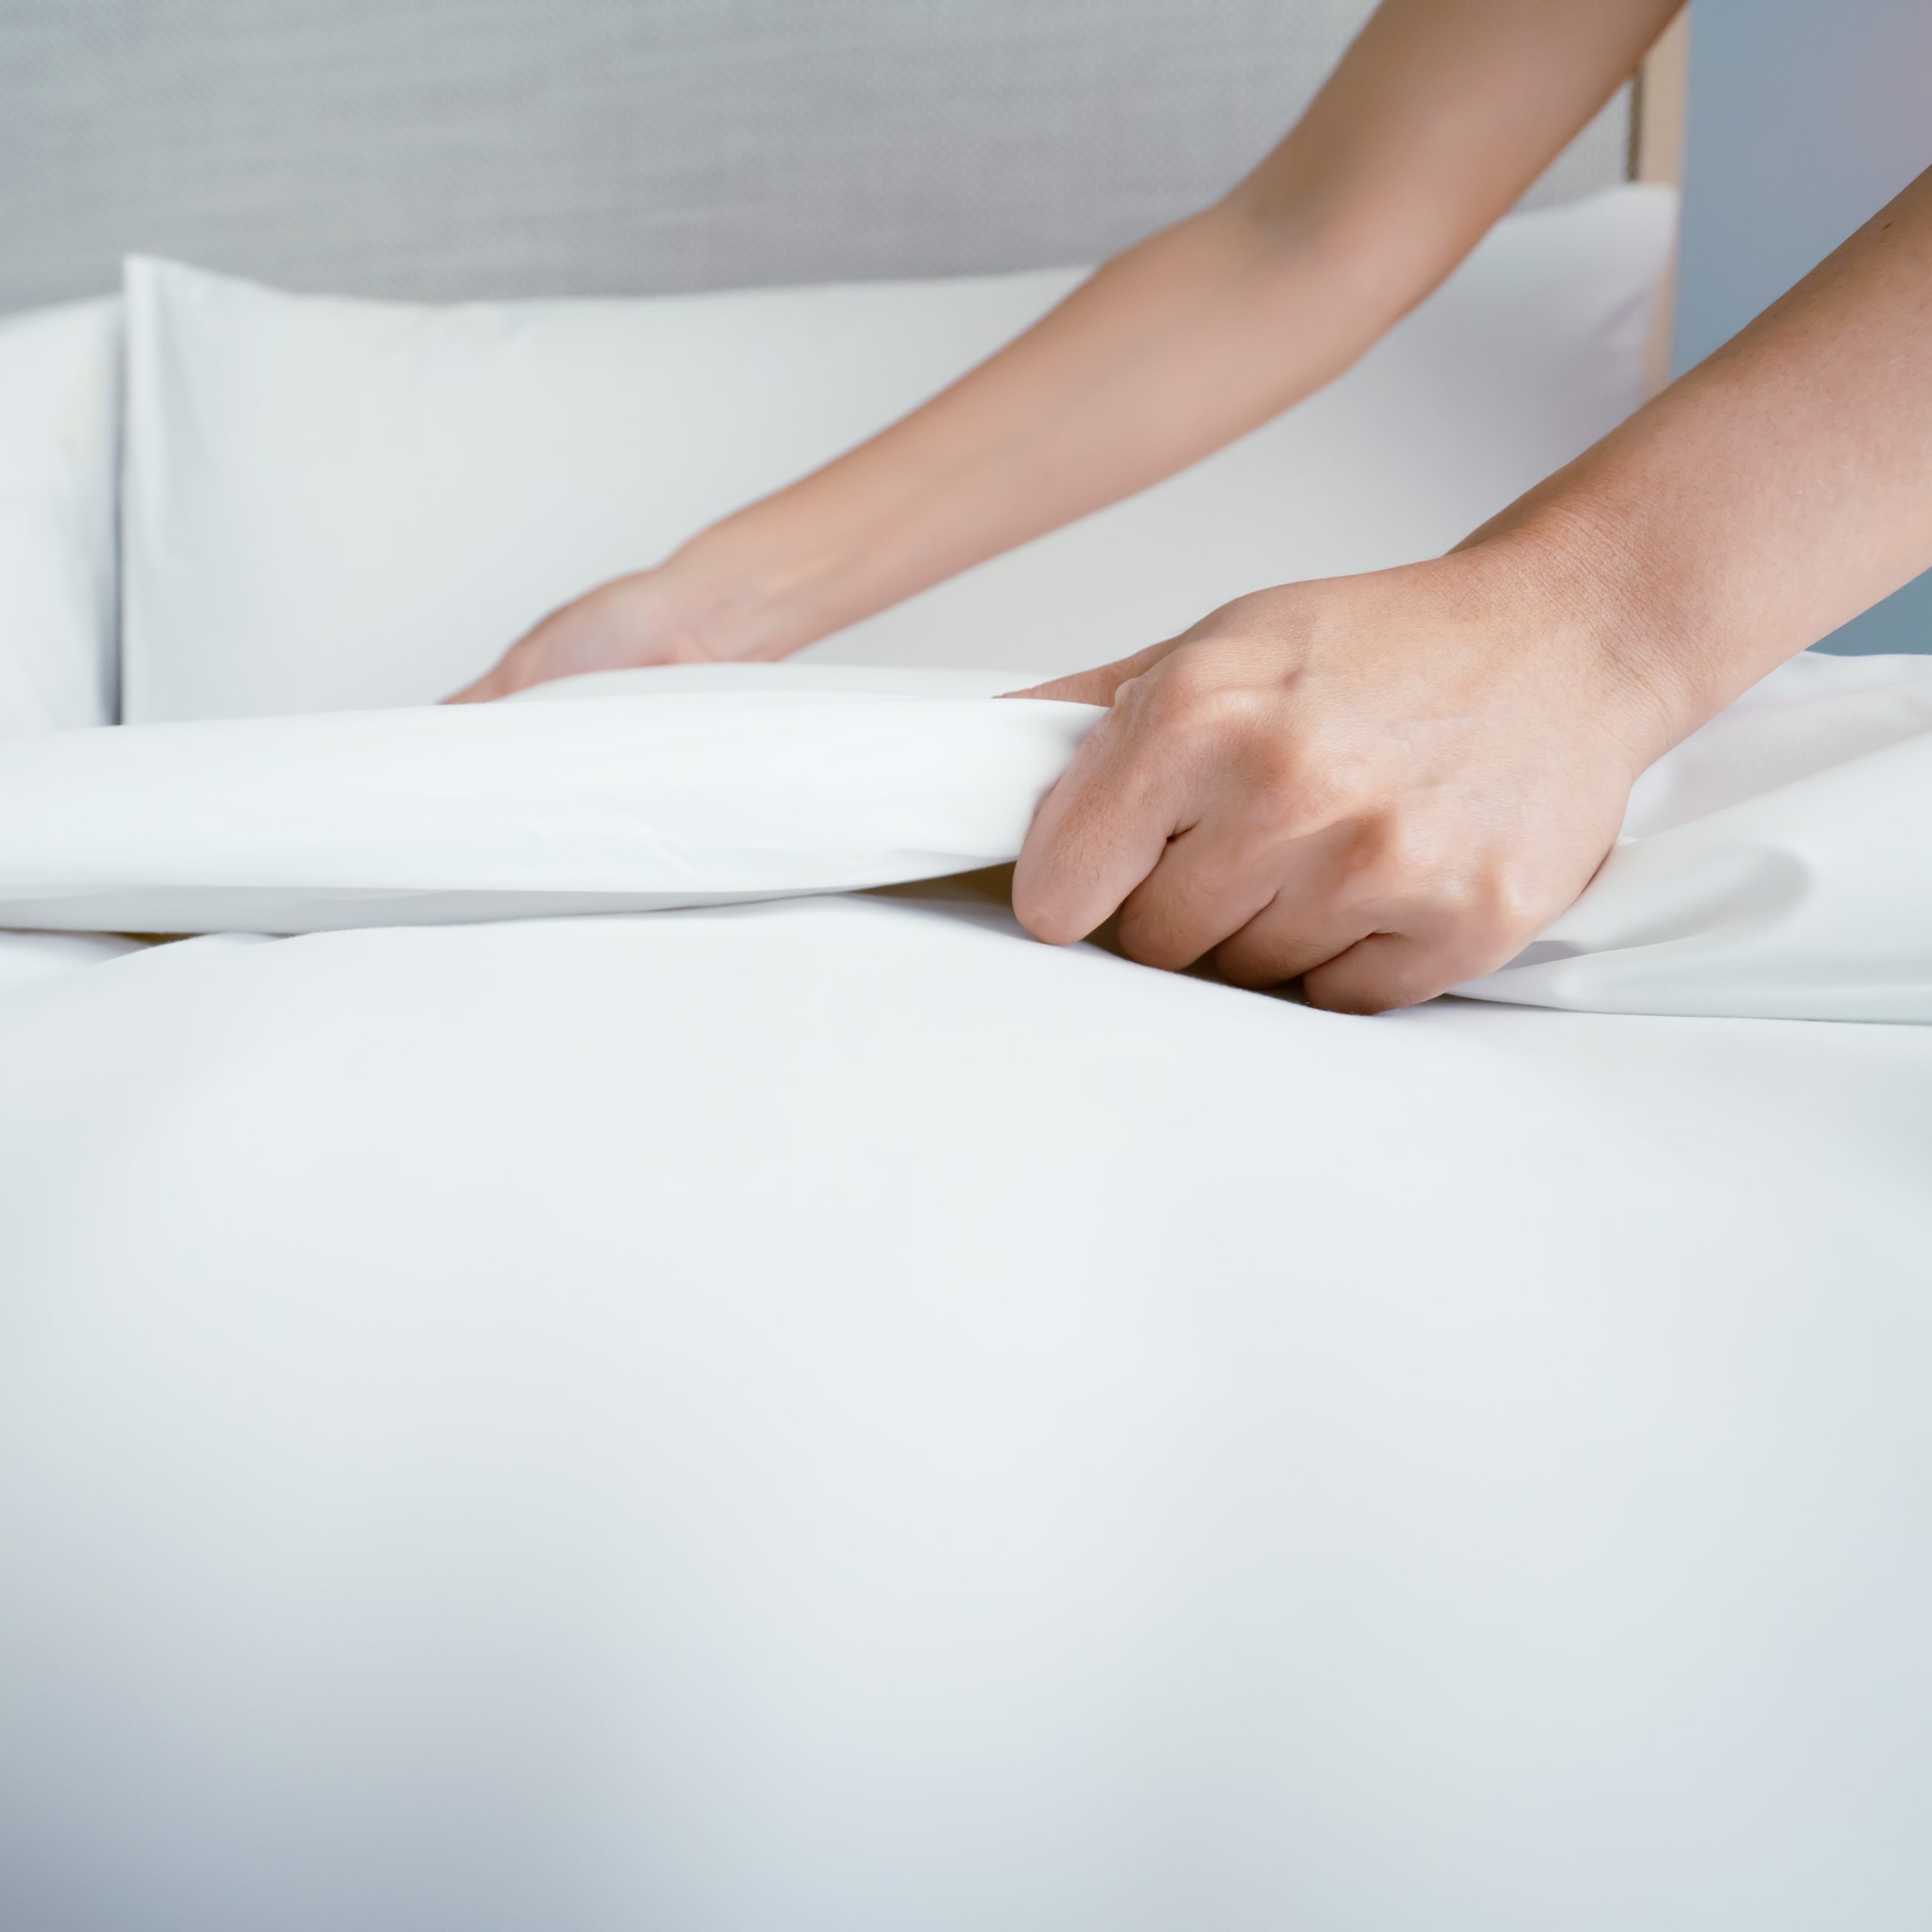 Maid services changing linens